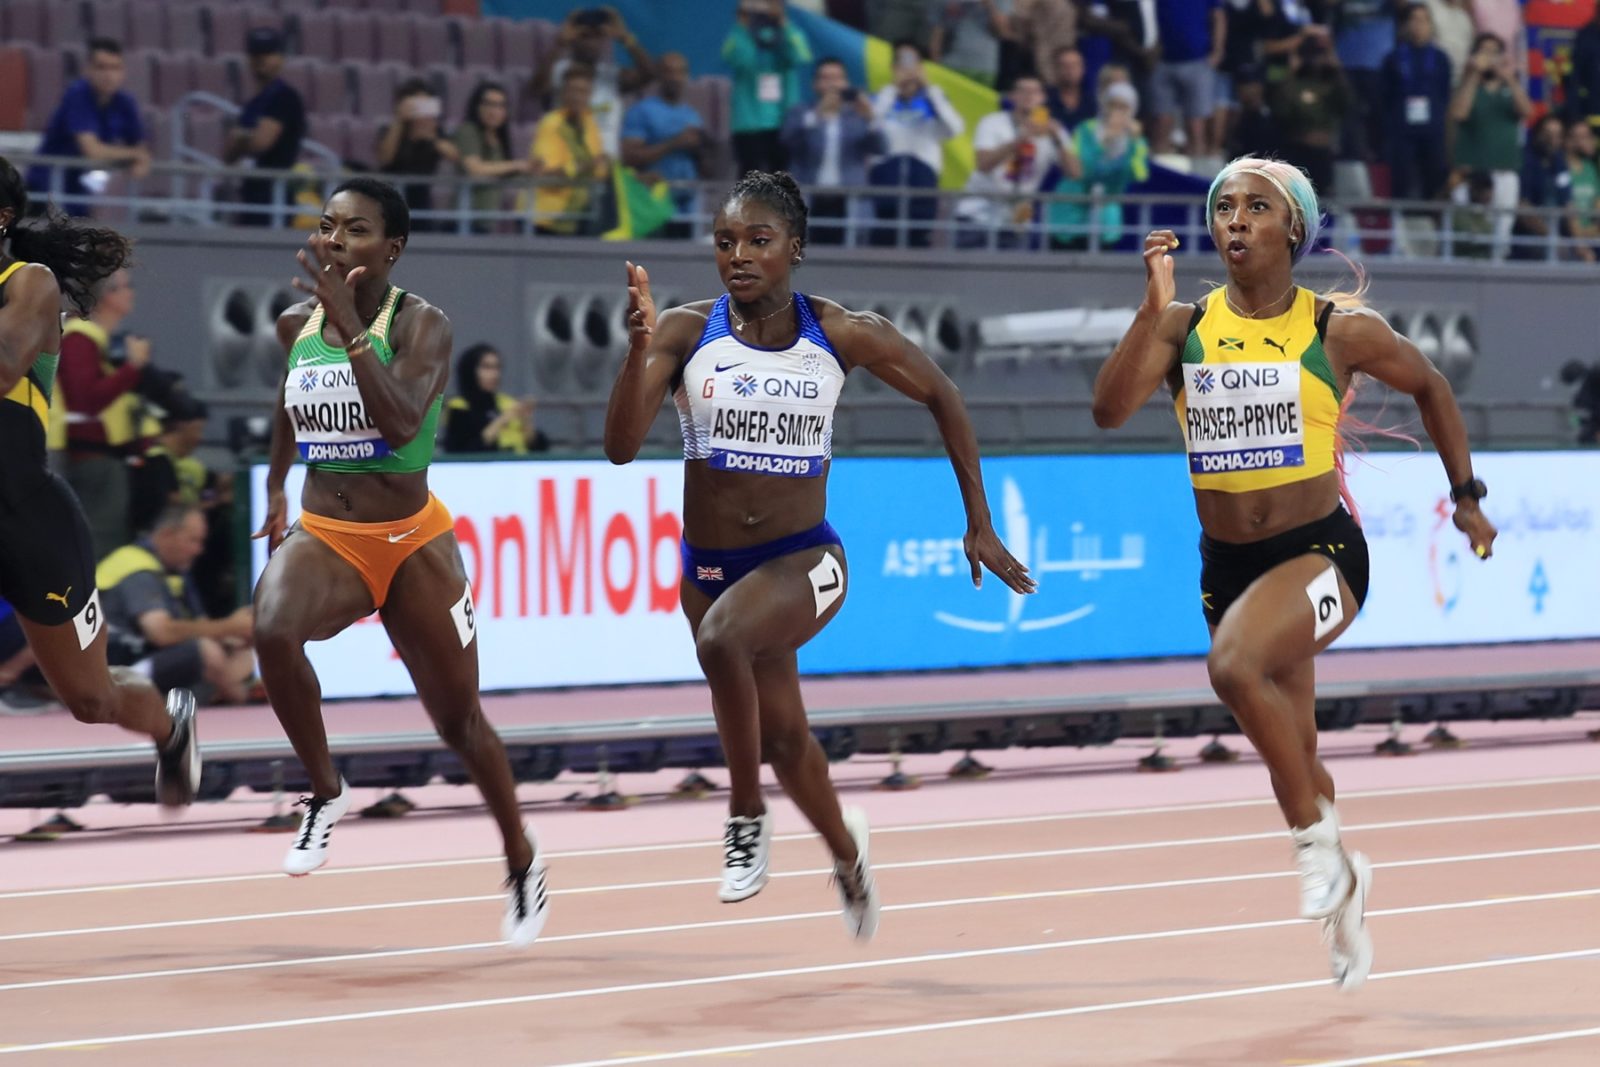 Dina Asher-Smith of Great Britain and Shelly-Ann Fraser-Pryce of Jamaica compete in the Women's 100 Metres final during day three of 17th IAAF World Athletics Championships Doha 2019 at Khalifa International Stadium on September 29, 2019 in Doha, Qatar. (Photo by Andy Lyons/Getty Images for IAAF)